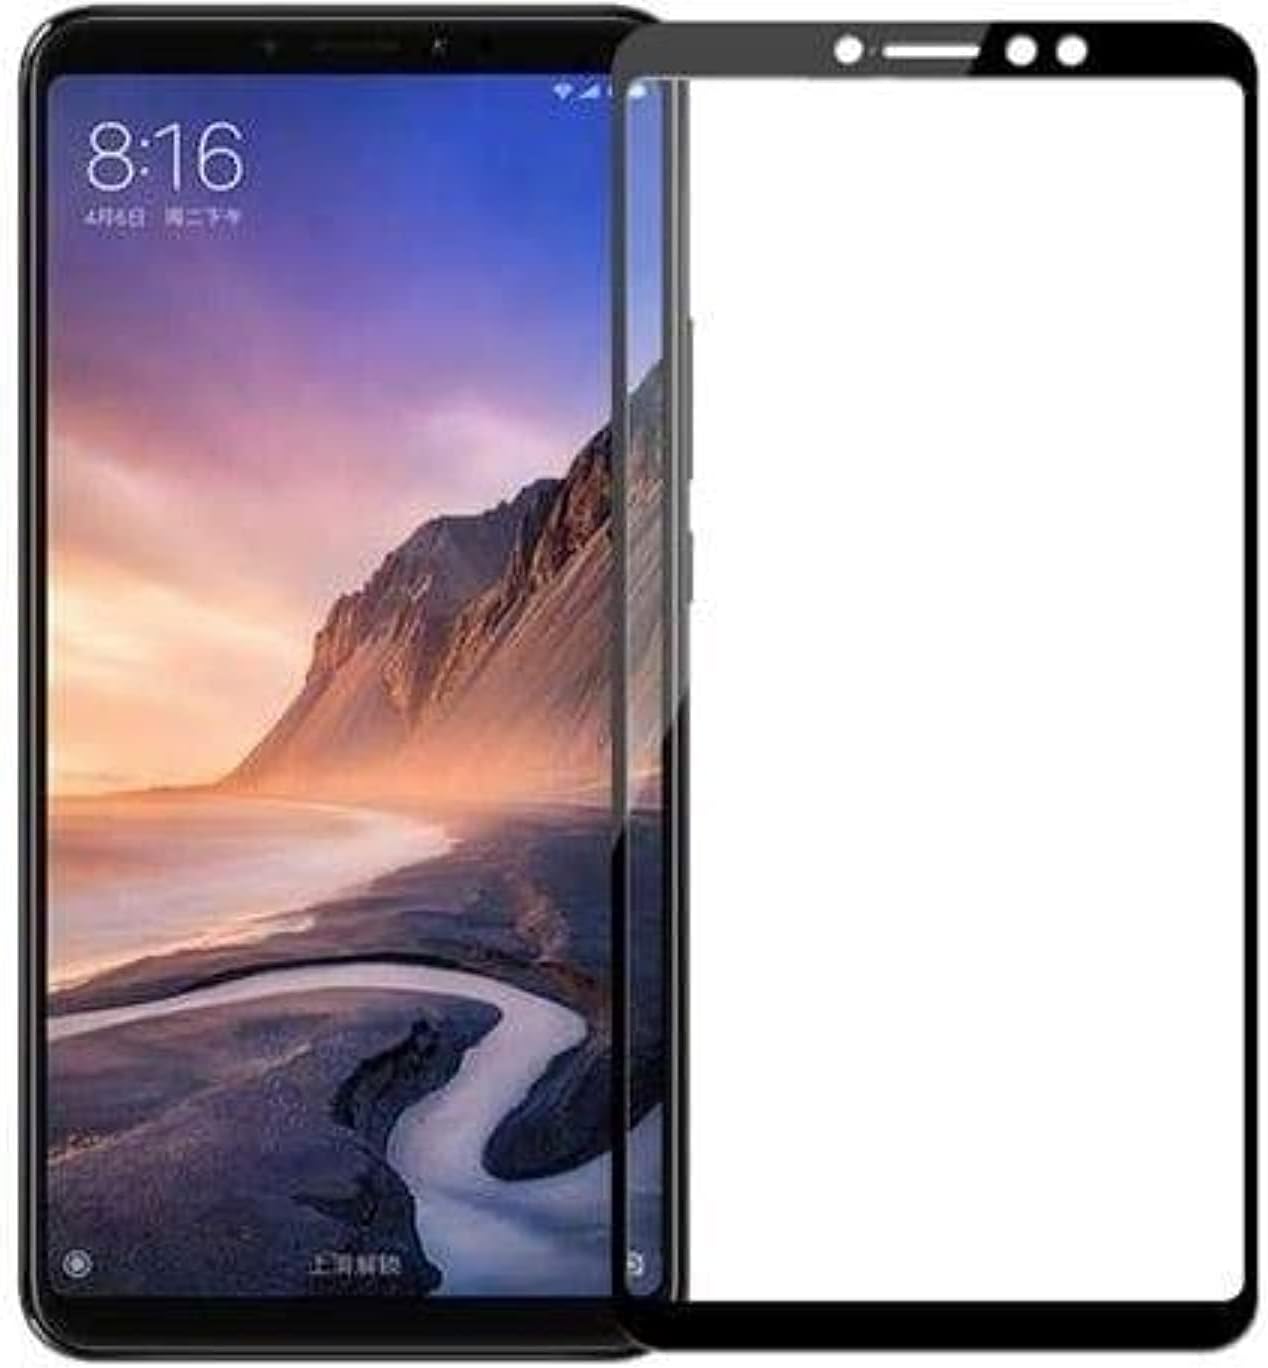 5D Glass Screen Protector for Xiaomi Mi Max 3 - Transparent with Black Frame